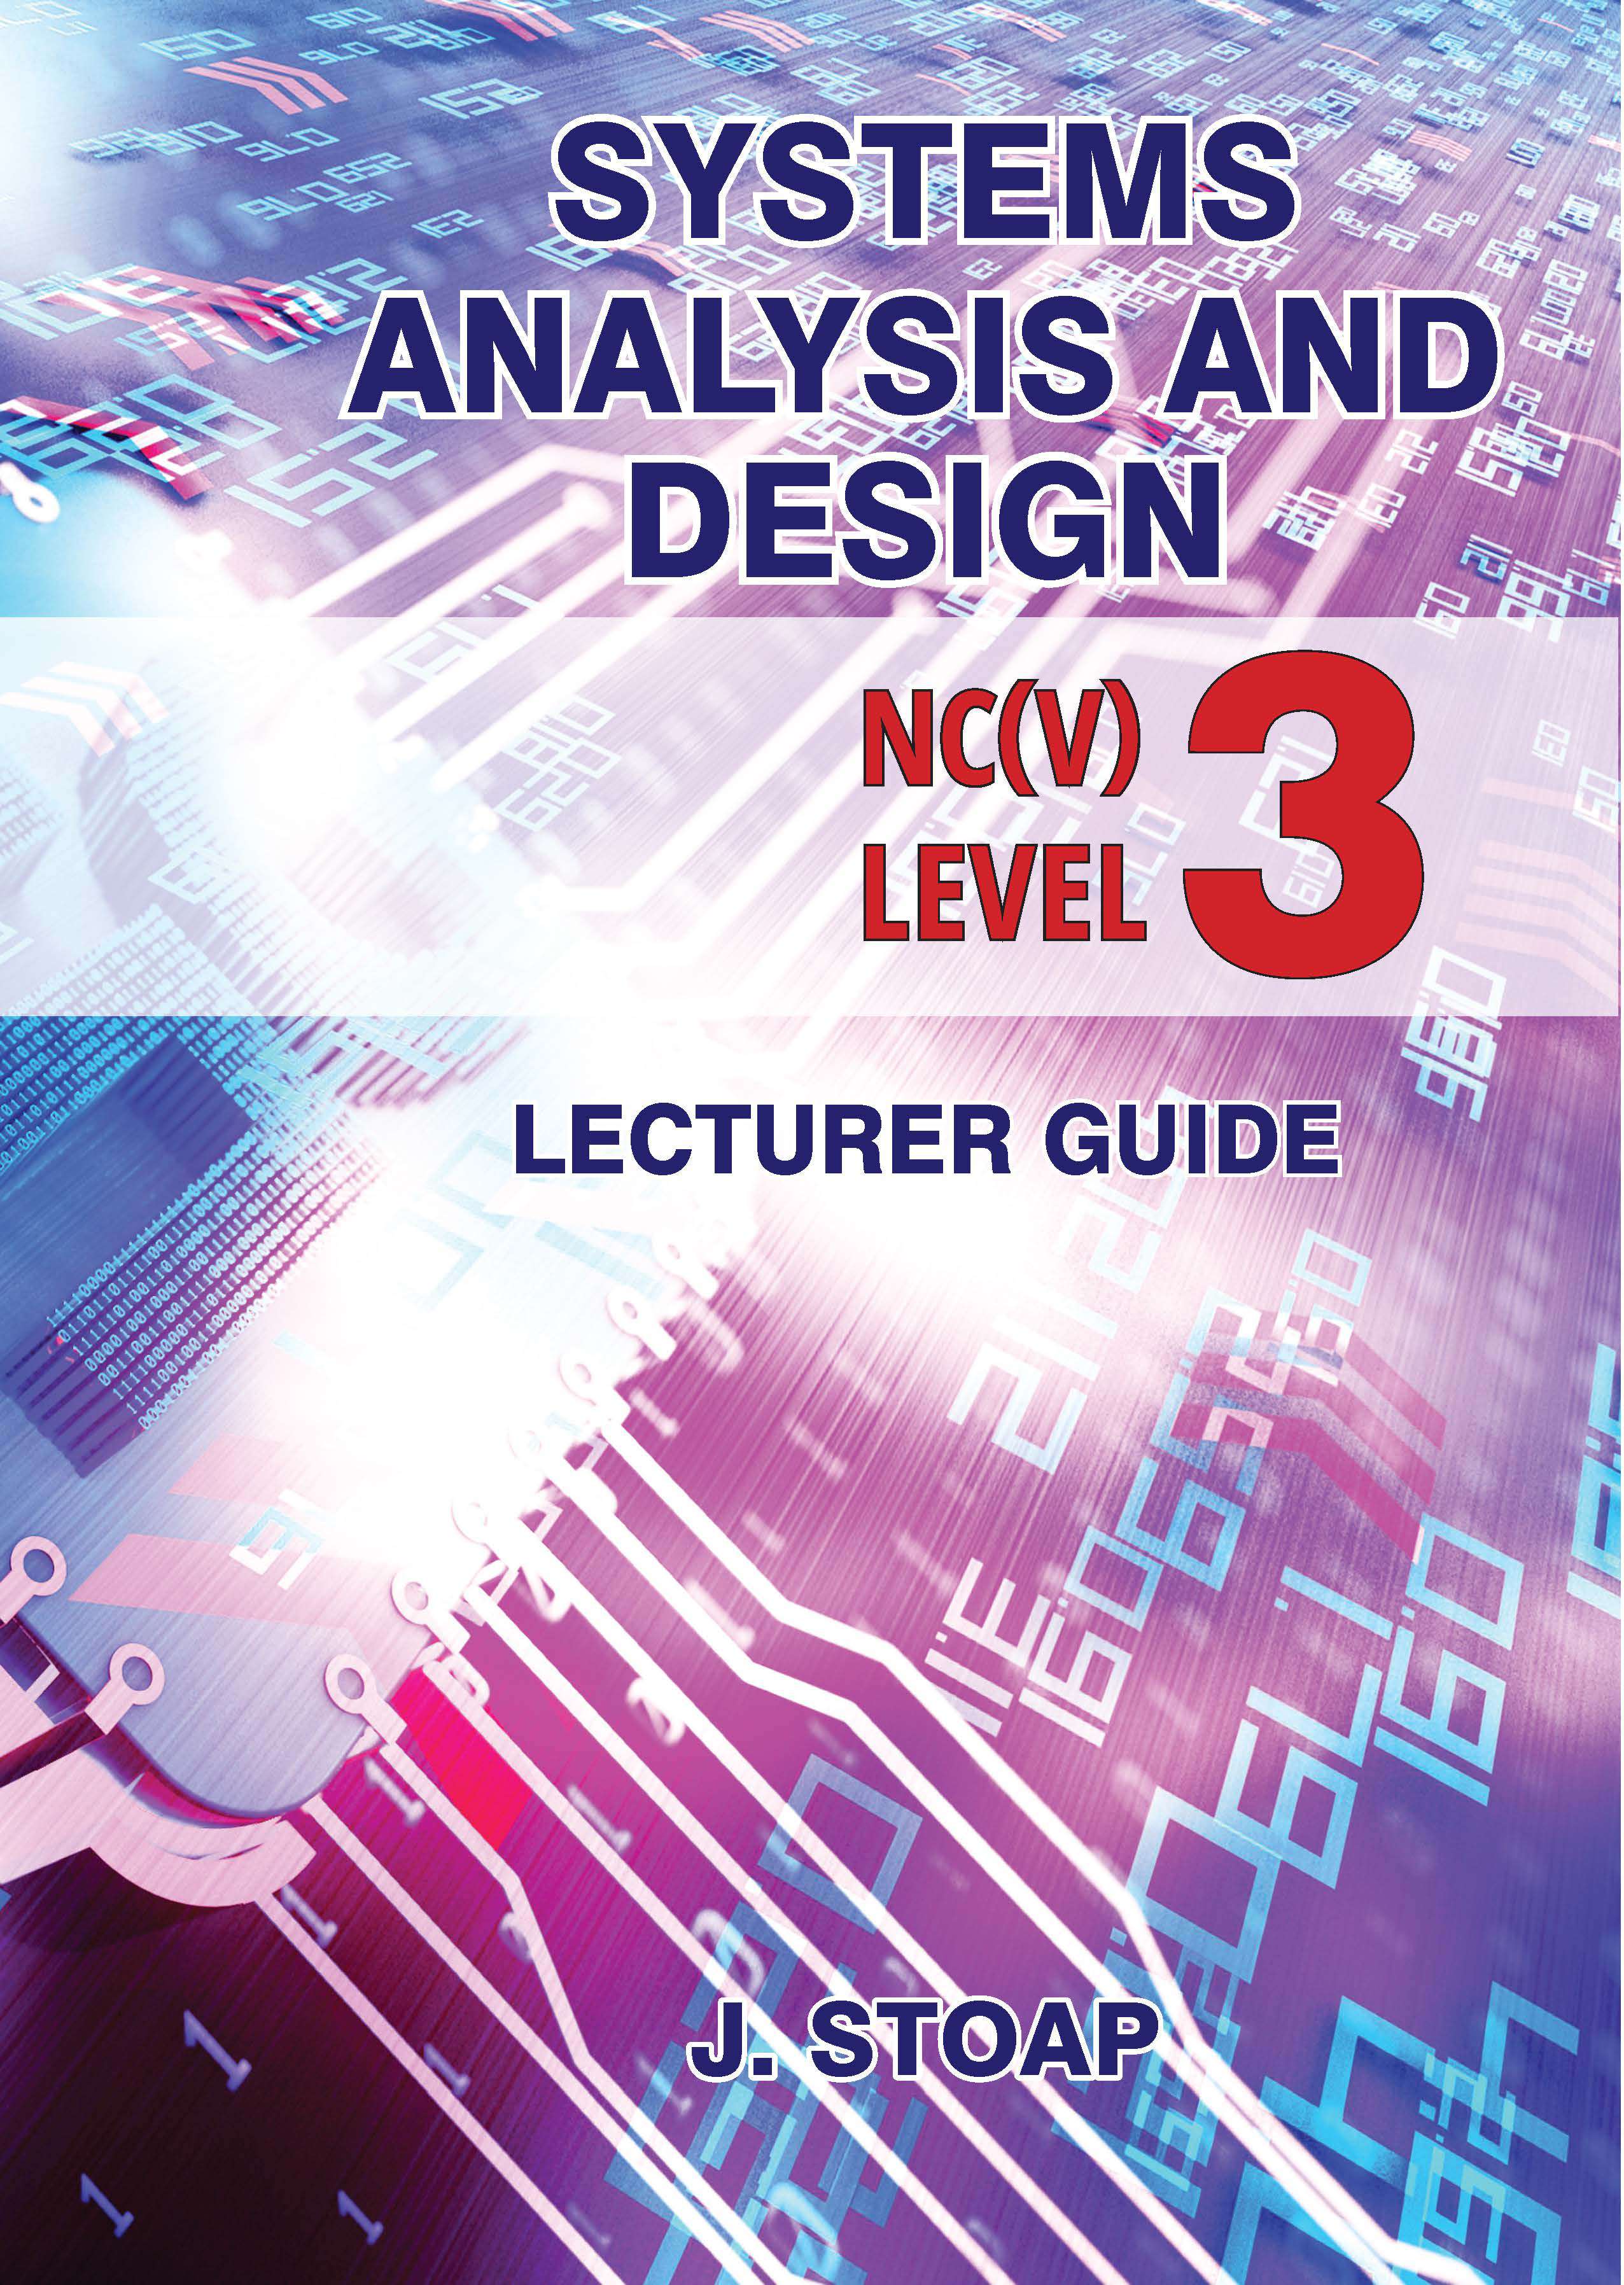 SHUTERS SYSTEMS ANALYSIS AND DESIGN NC(V) LEVEL 3 LECTURER GUIDE Cover